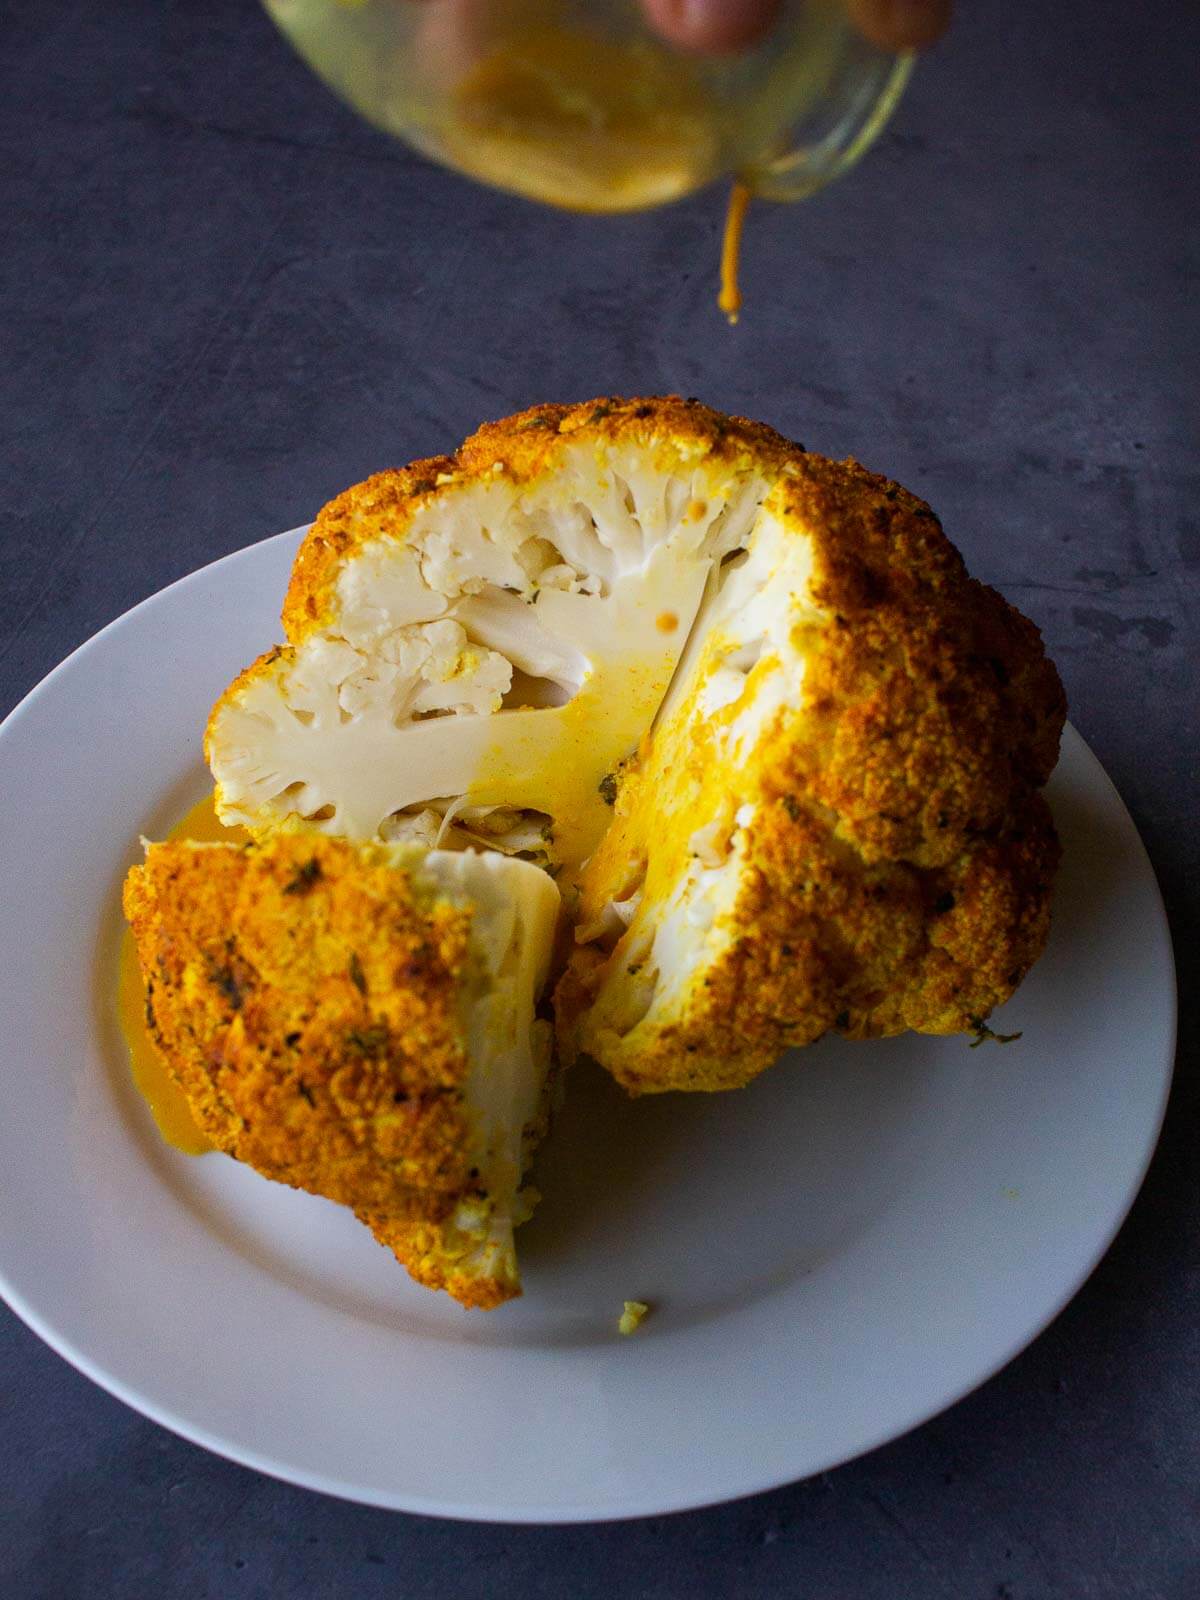 pouring tahini sauce over the baked head of Roasted Cauliflower.